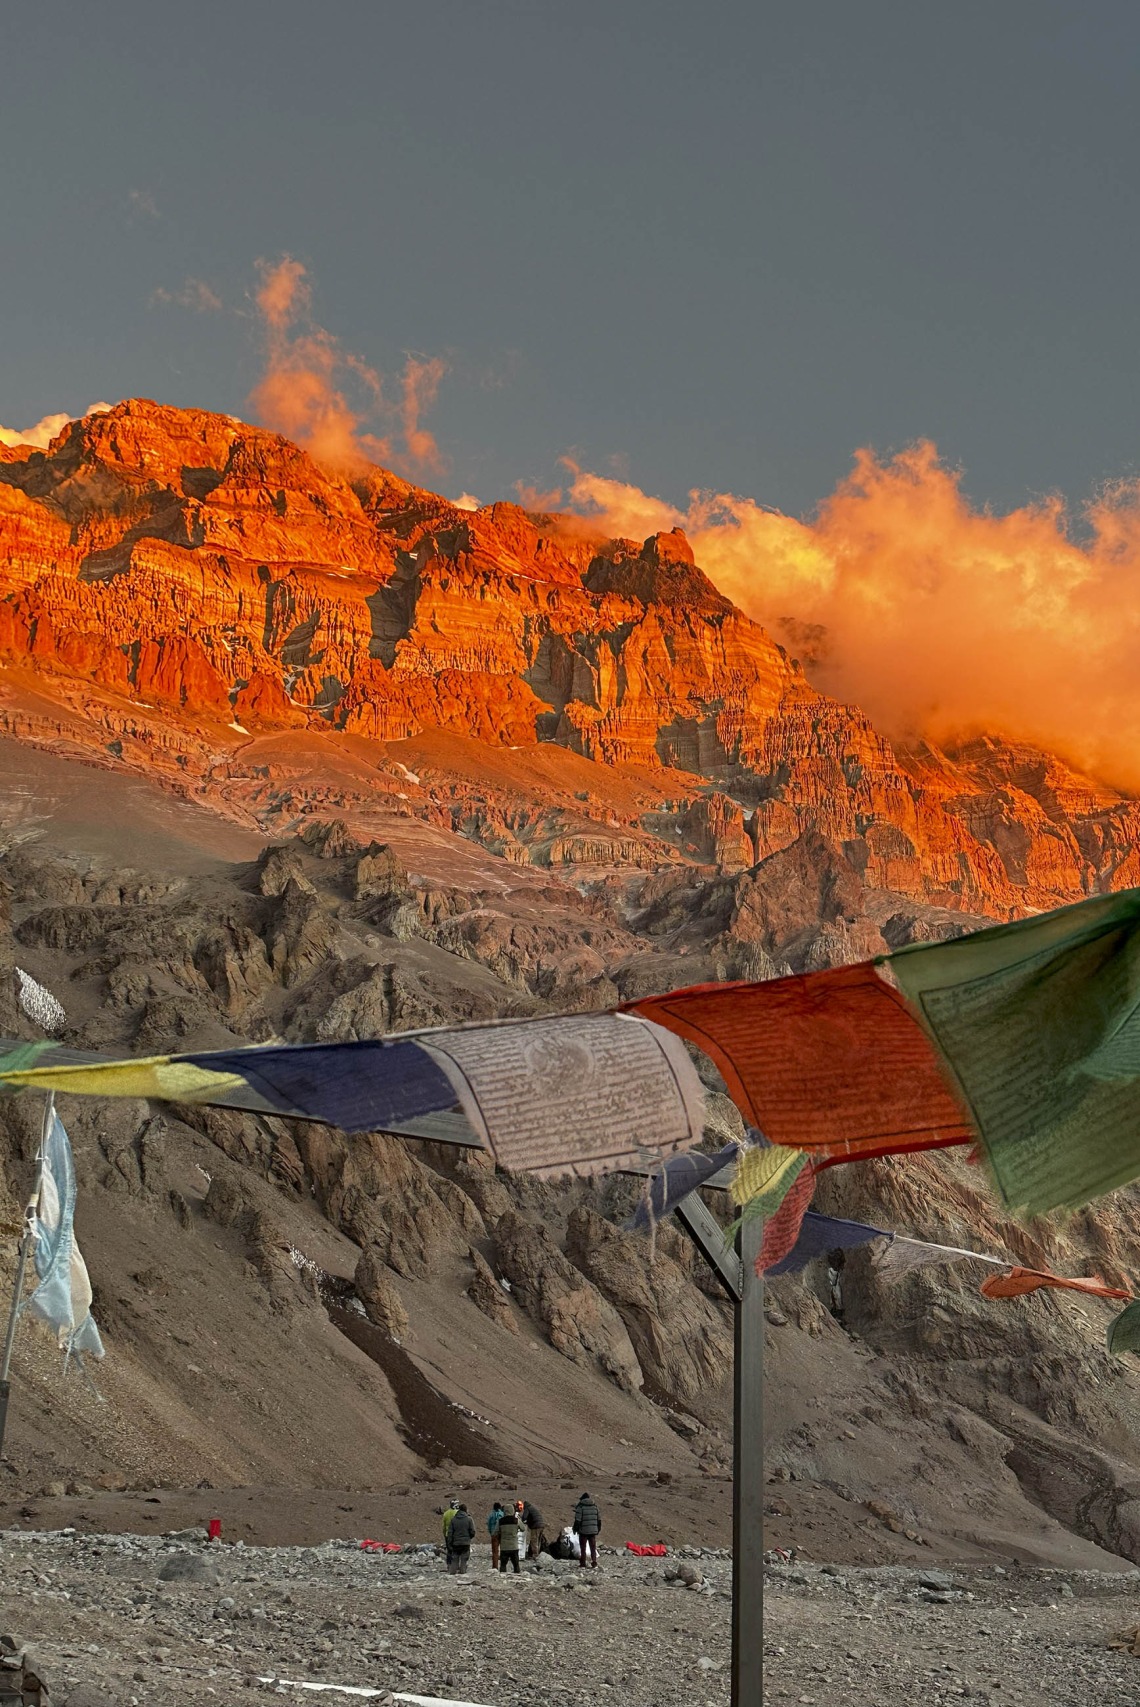 Prayer flags flutter in the wind with mountains and clouds looming in the background.